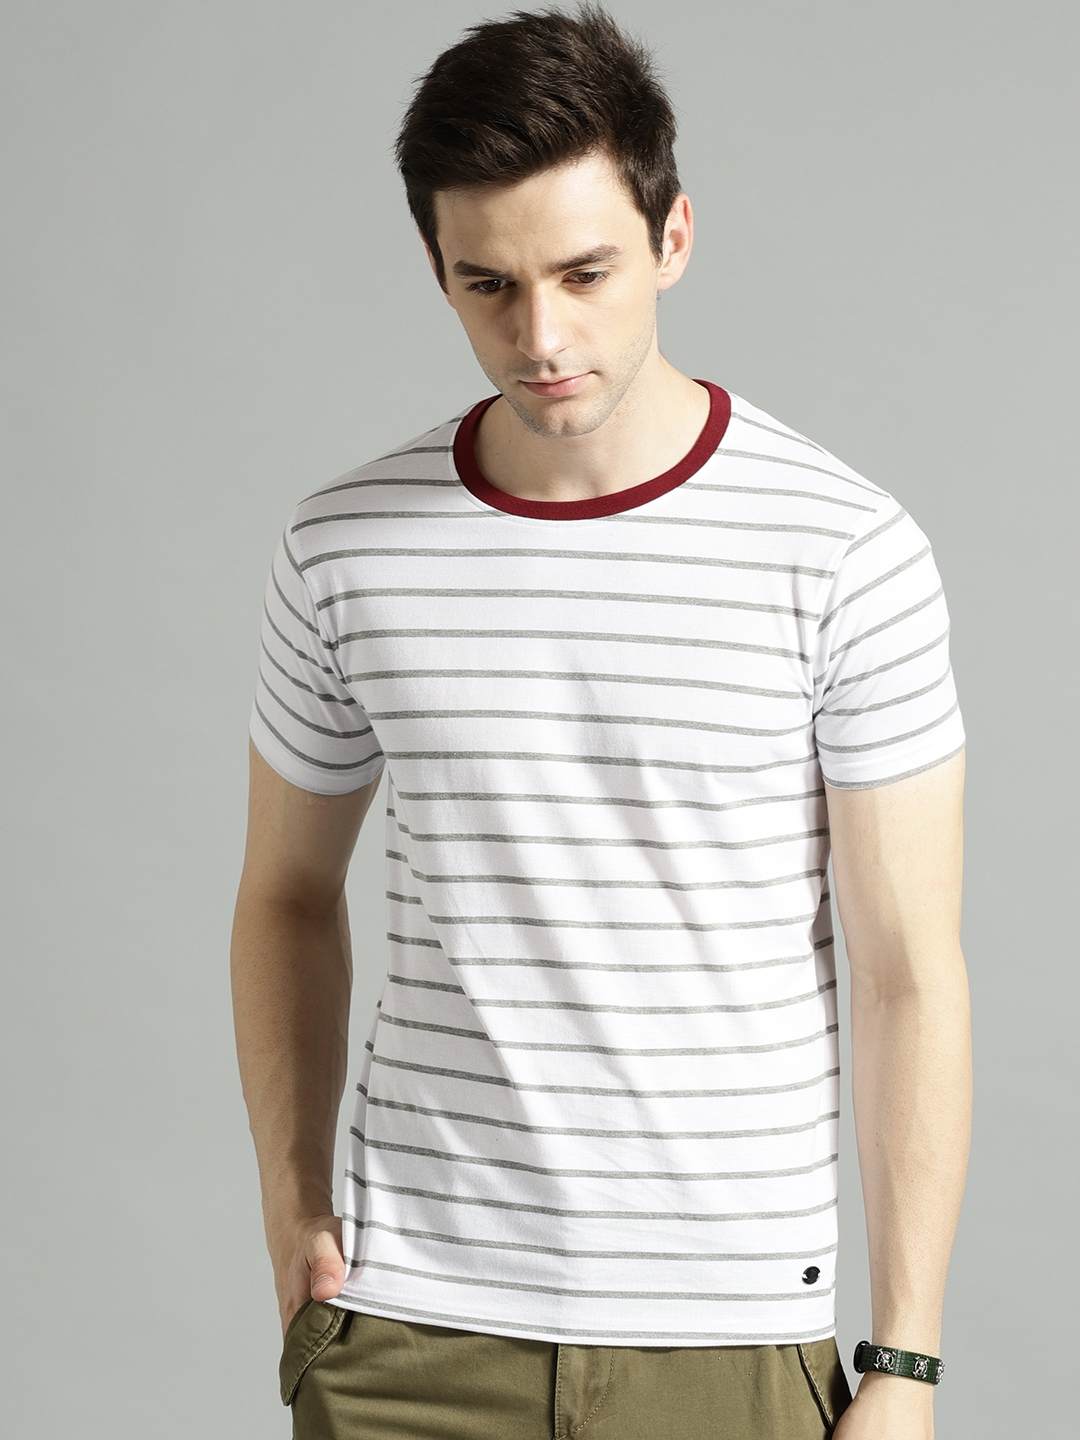 Buy Roadster Men White & Grey Striped Contrast Round Neck T Shirt ...